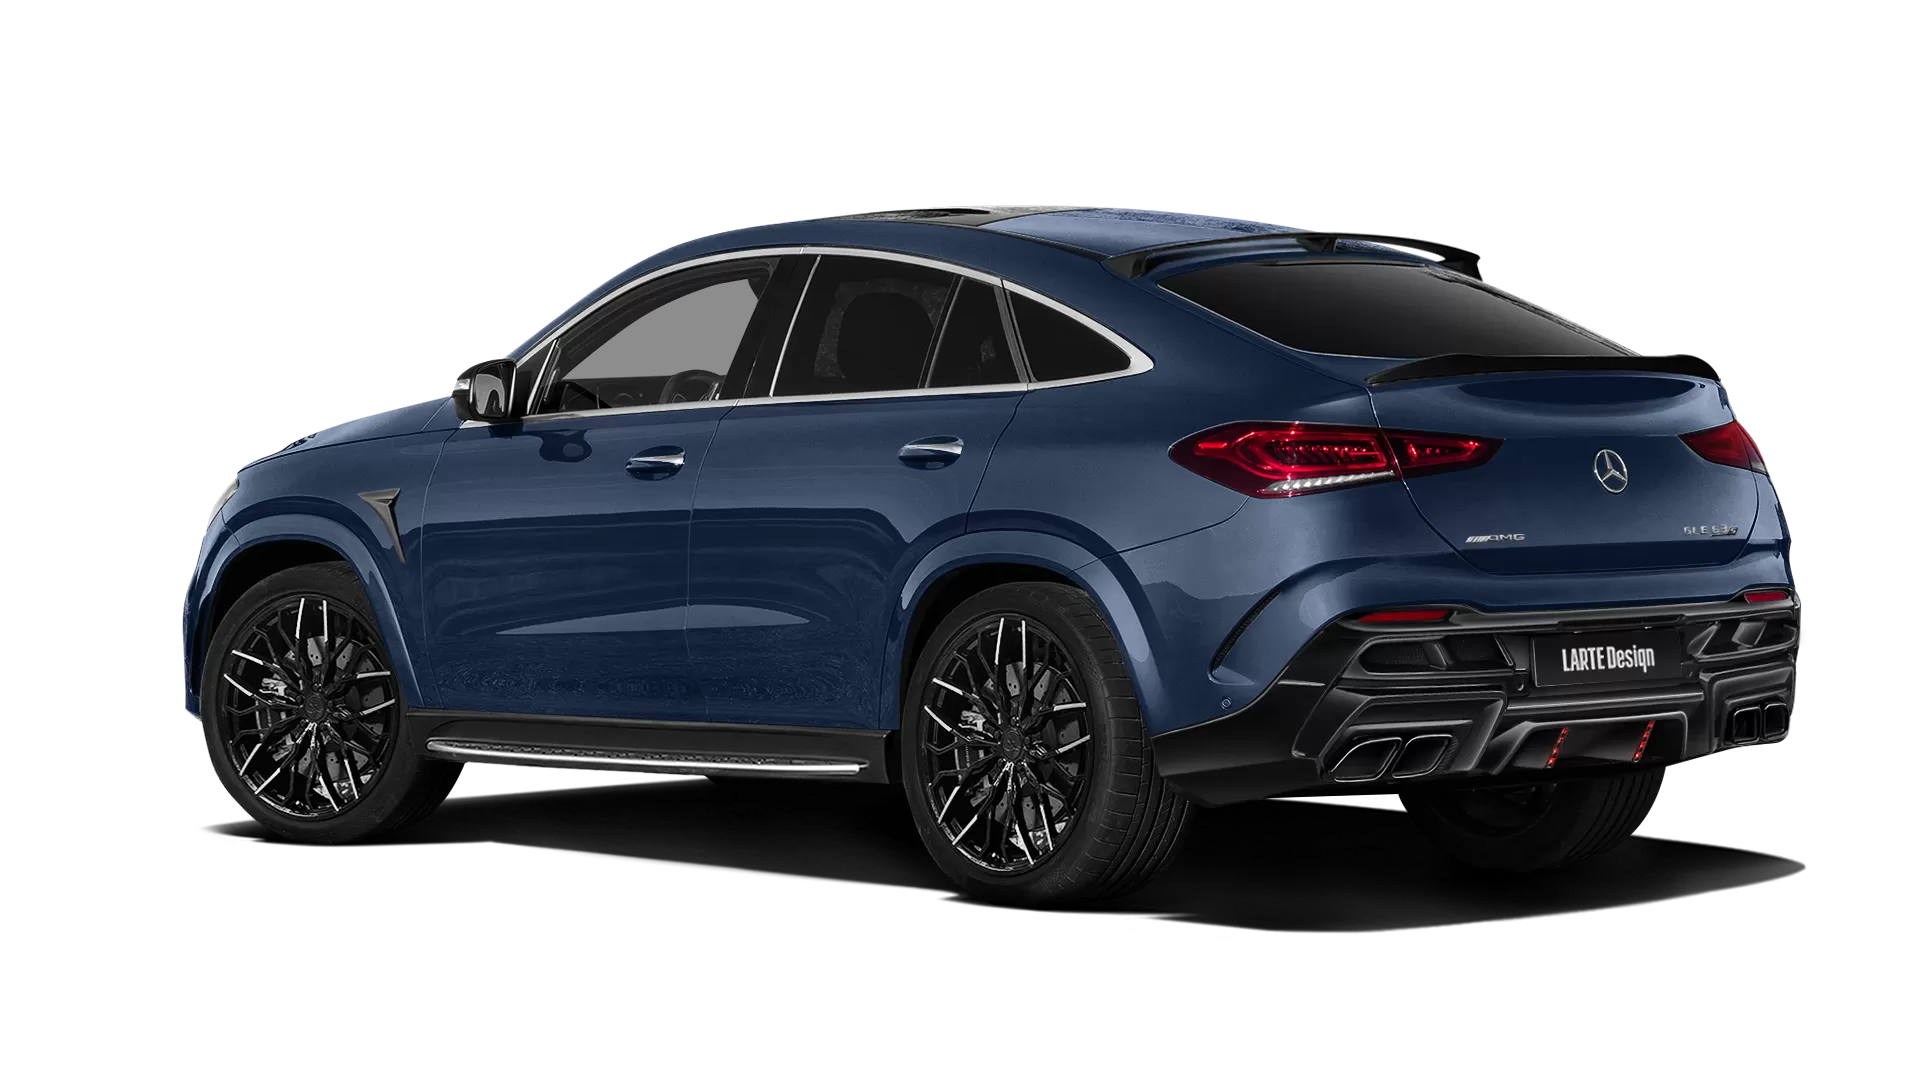 Mercedes GLE Coupe AMG 63 C167 with painted body kit: rear view shown in Cavansite Blue